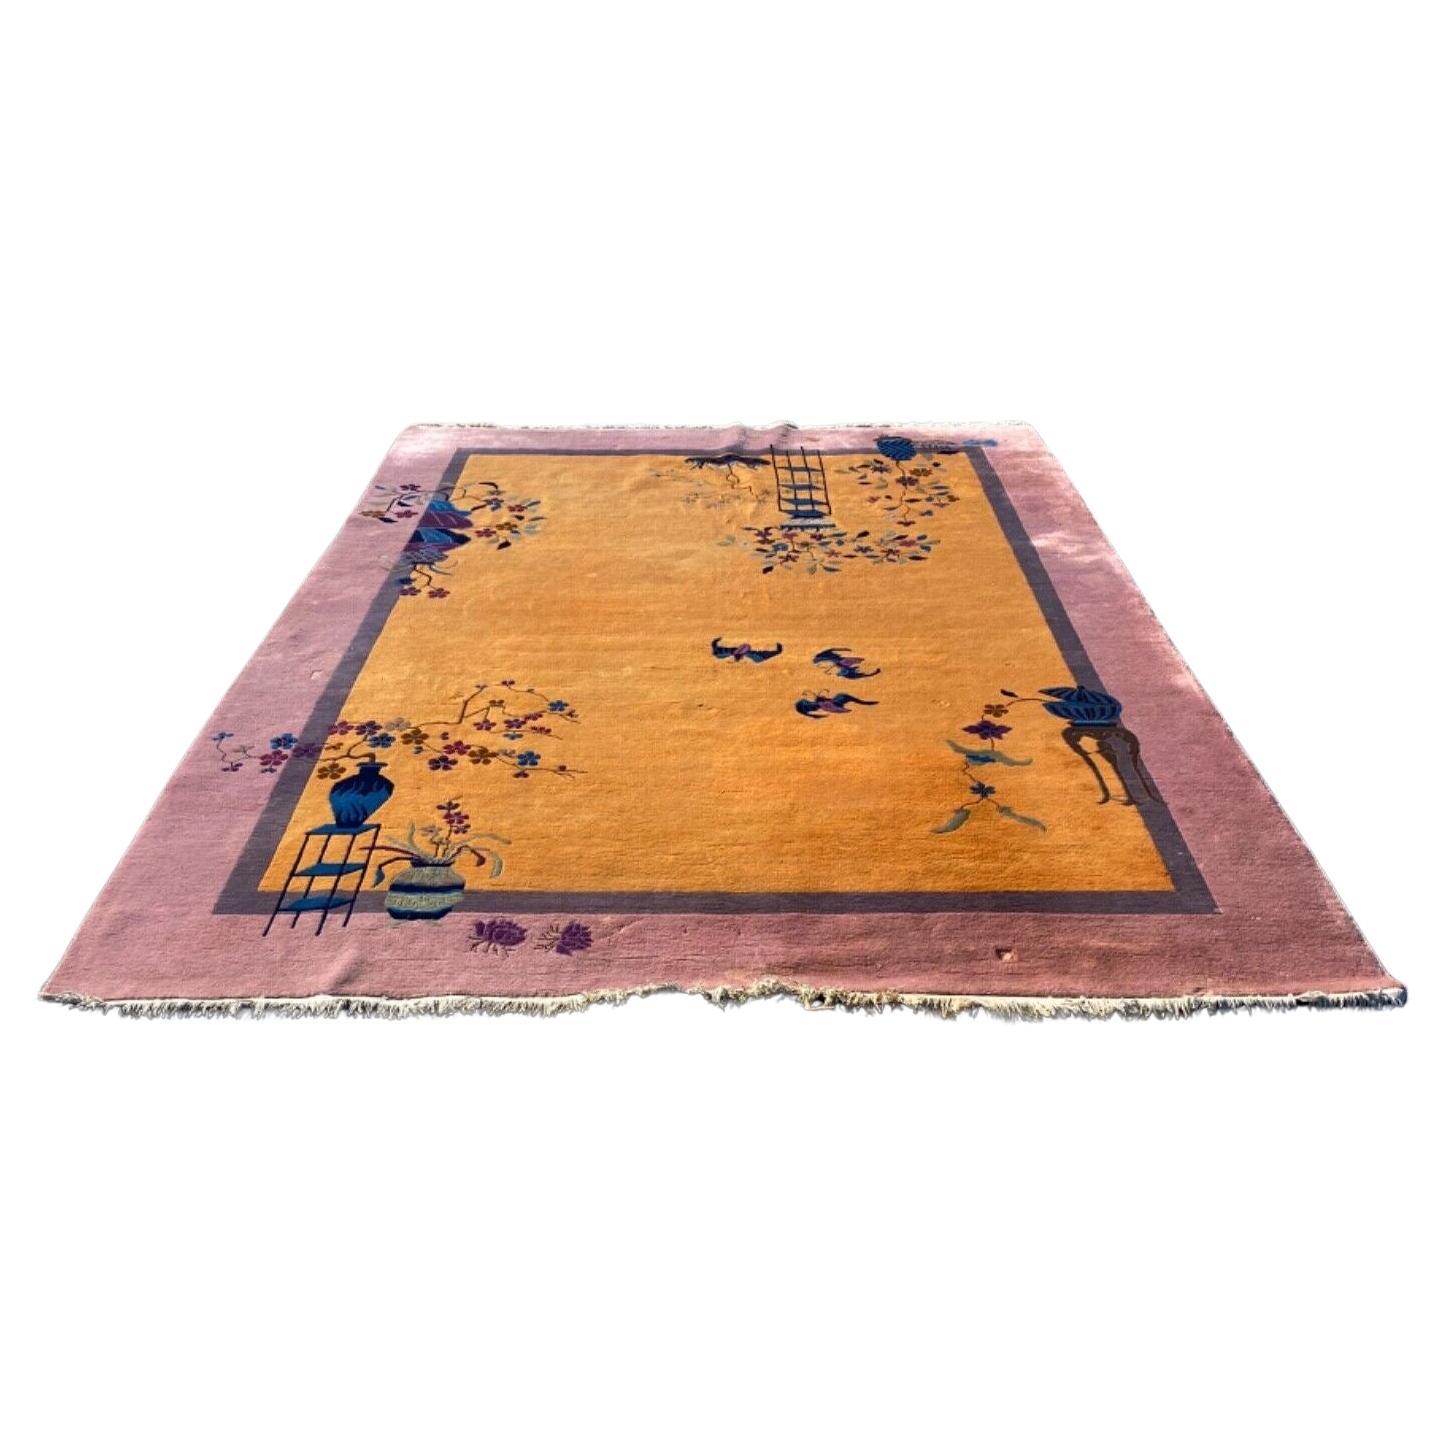 Antique Chinese Art Deco Rug, attributed to Walter Nichols. This hand-knotted, wool, room-sized rug features a color-blocked field and border in Mustard, Plum and Lavender. Detailed sprays of florals, lotuses, peonies, chrysanthemums, and plum